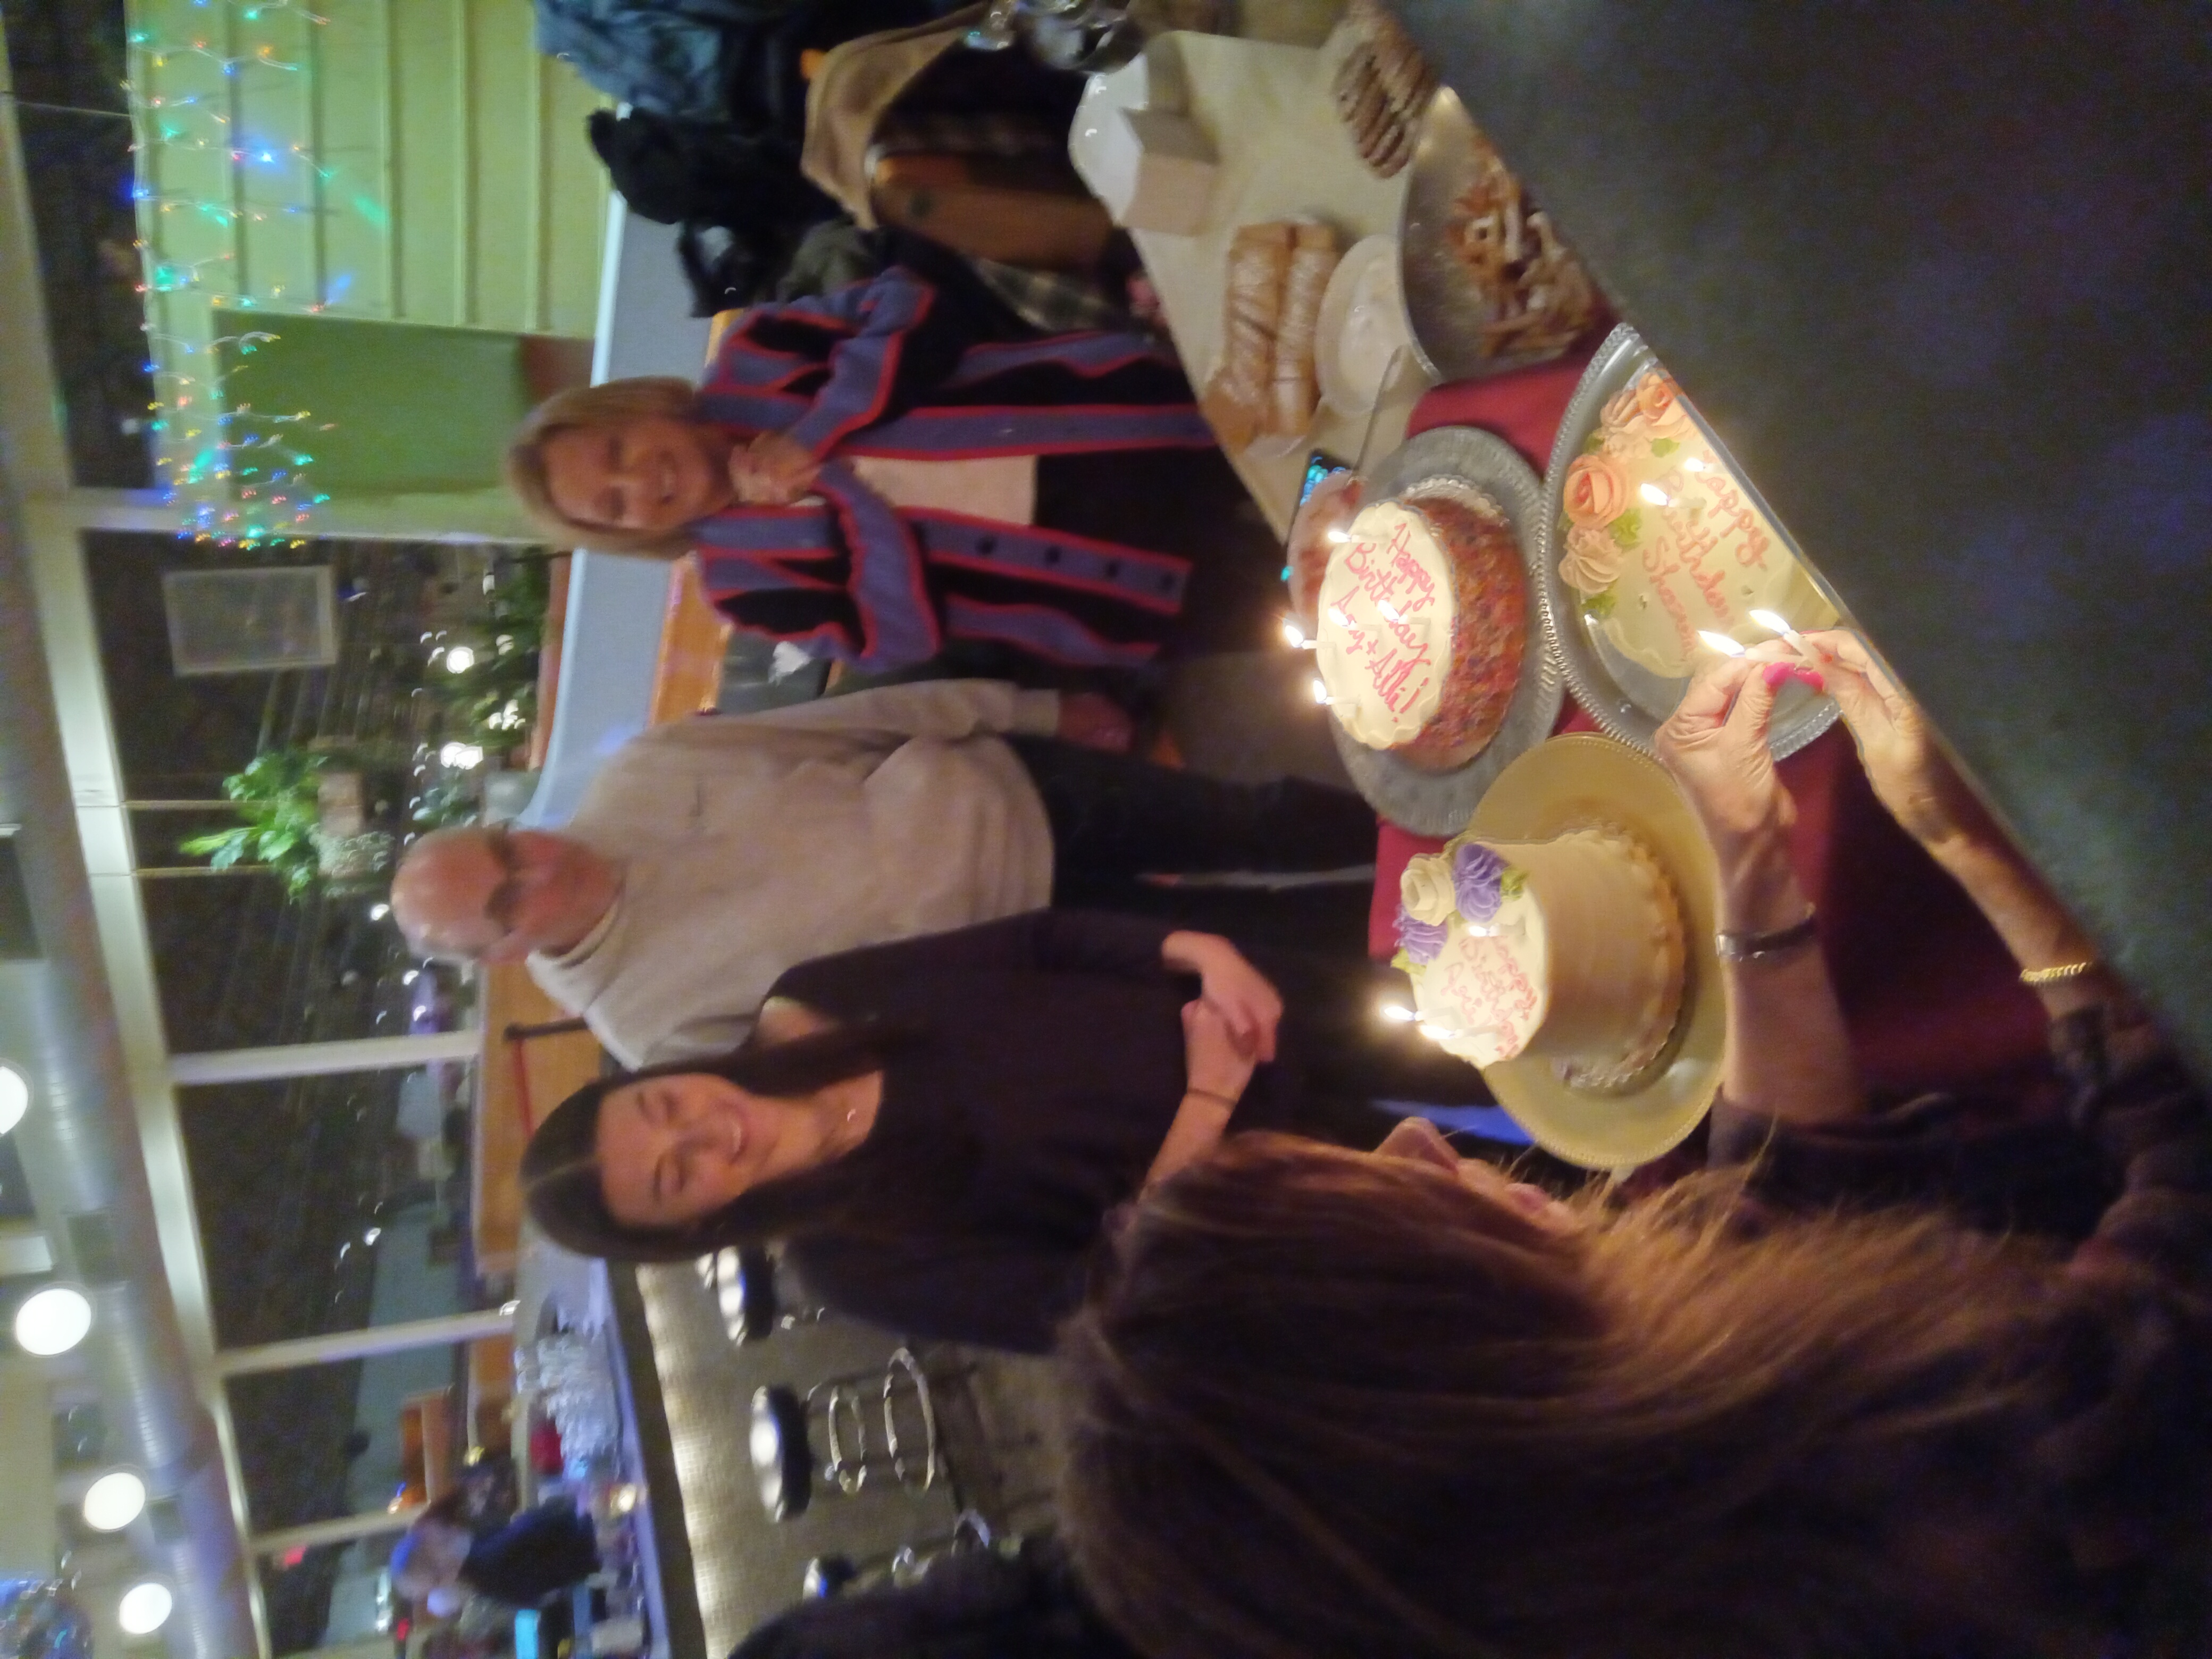 Drew Weissman with his wife and daughter, singing happy birthday while standing in front of a table with birthday cakes